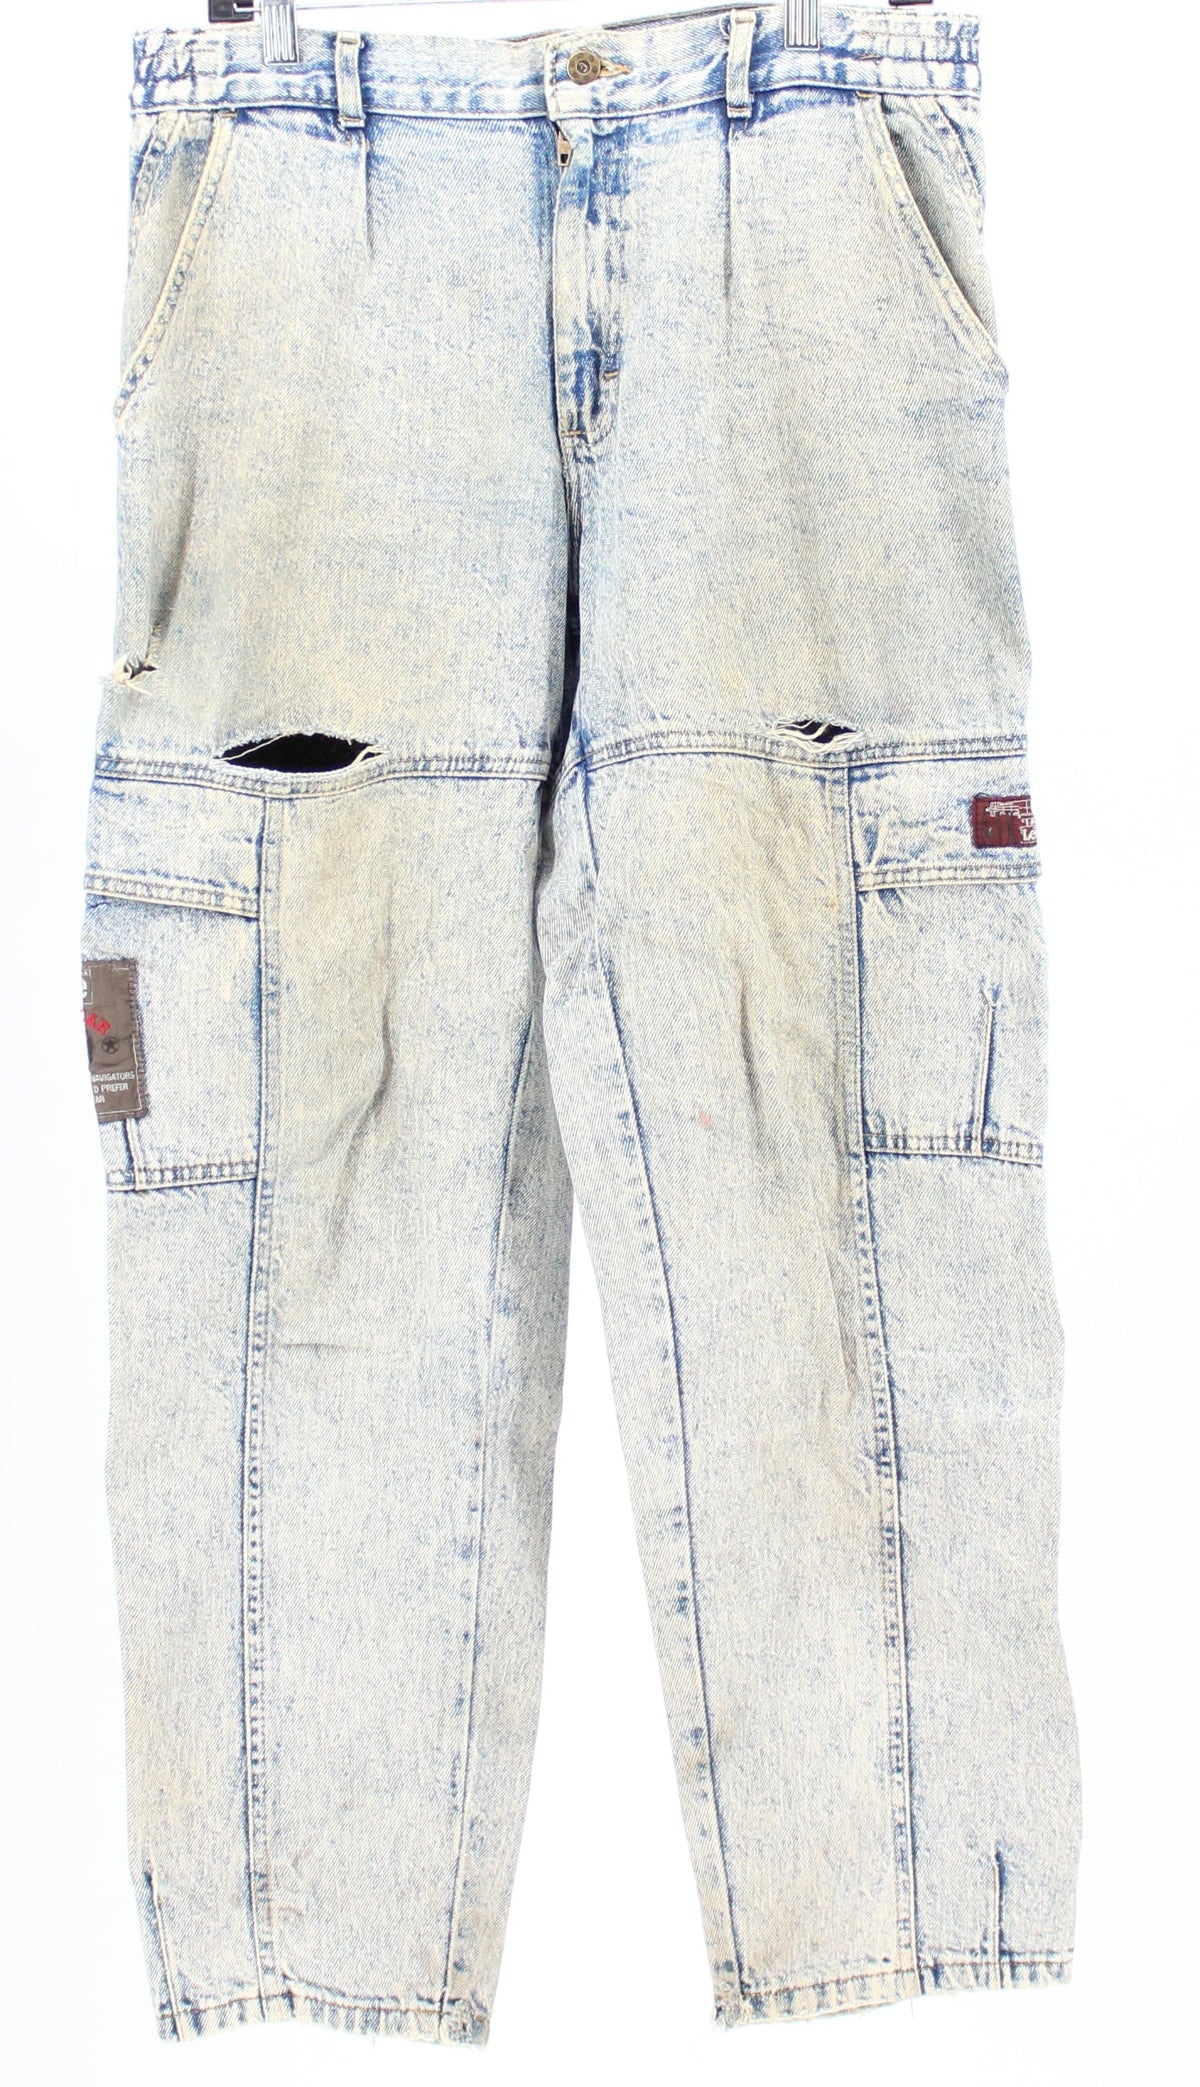 Lee Light Washed Air Gear Jeans